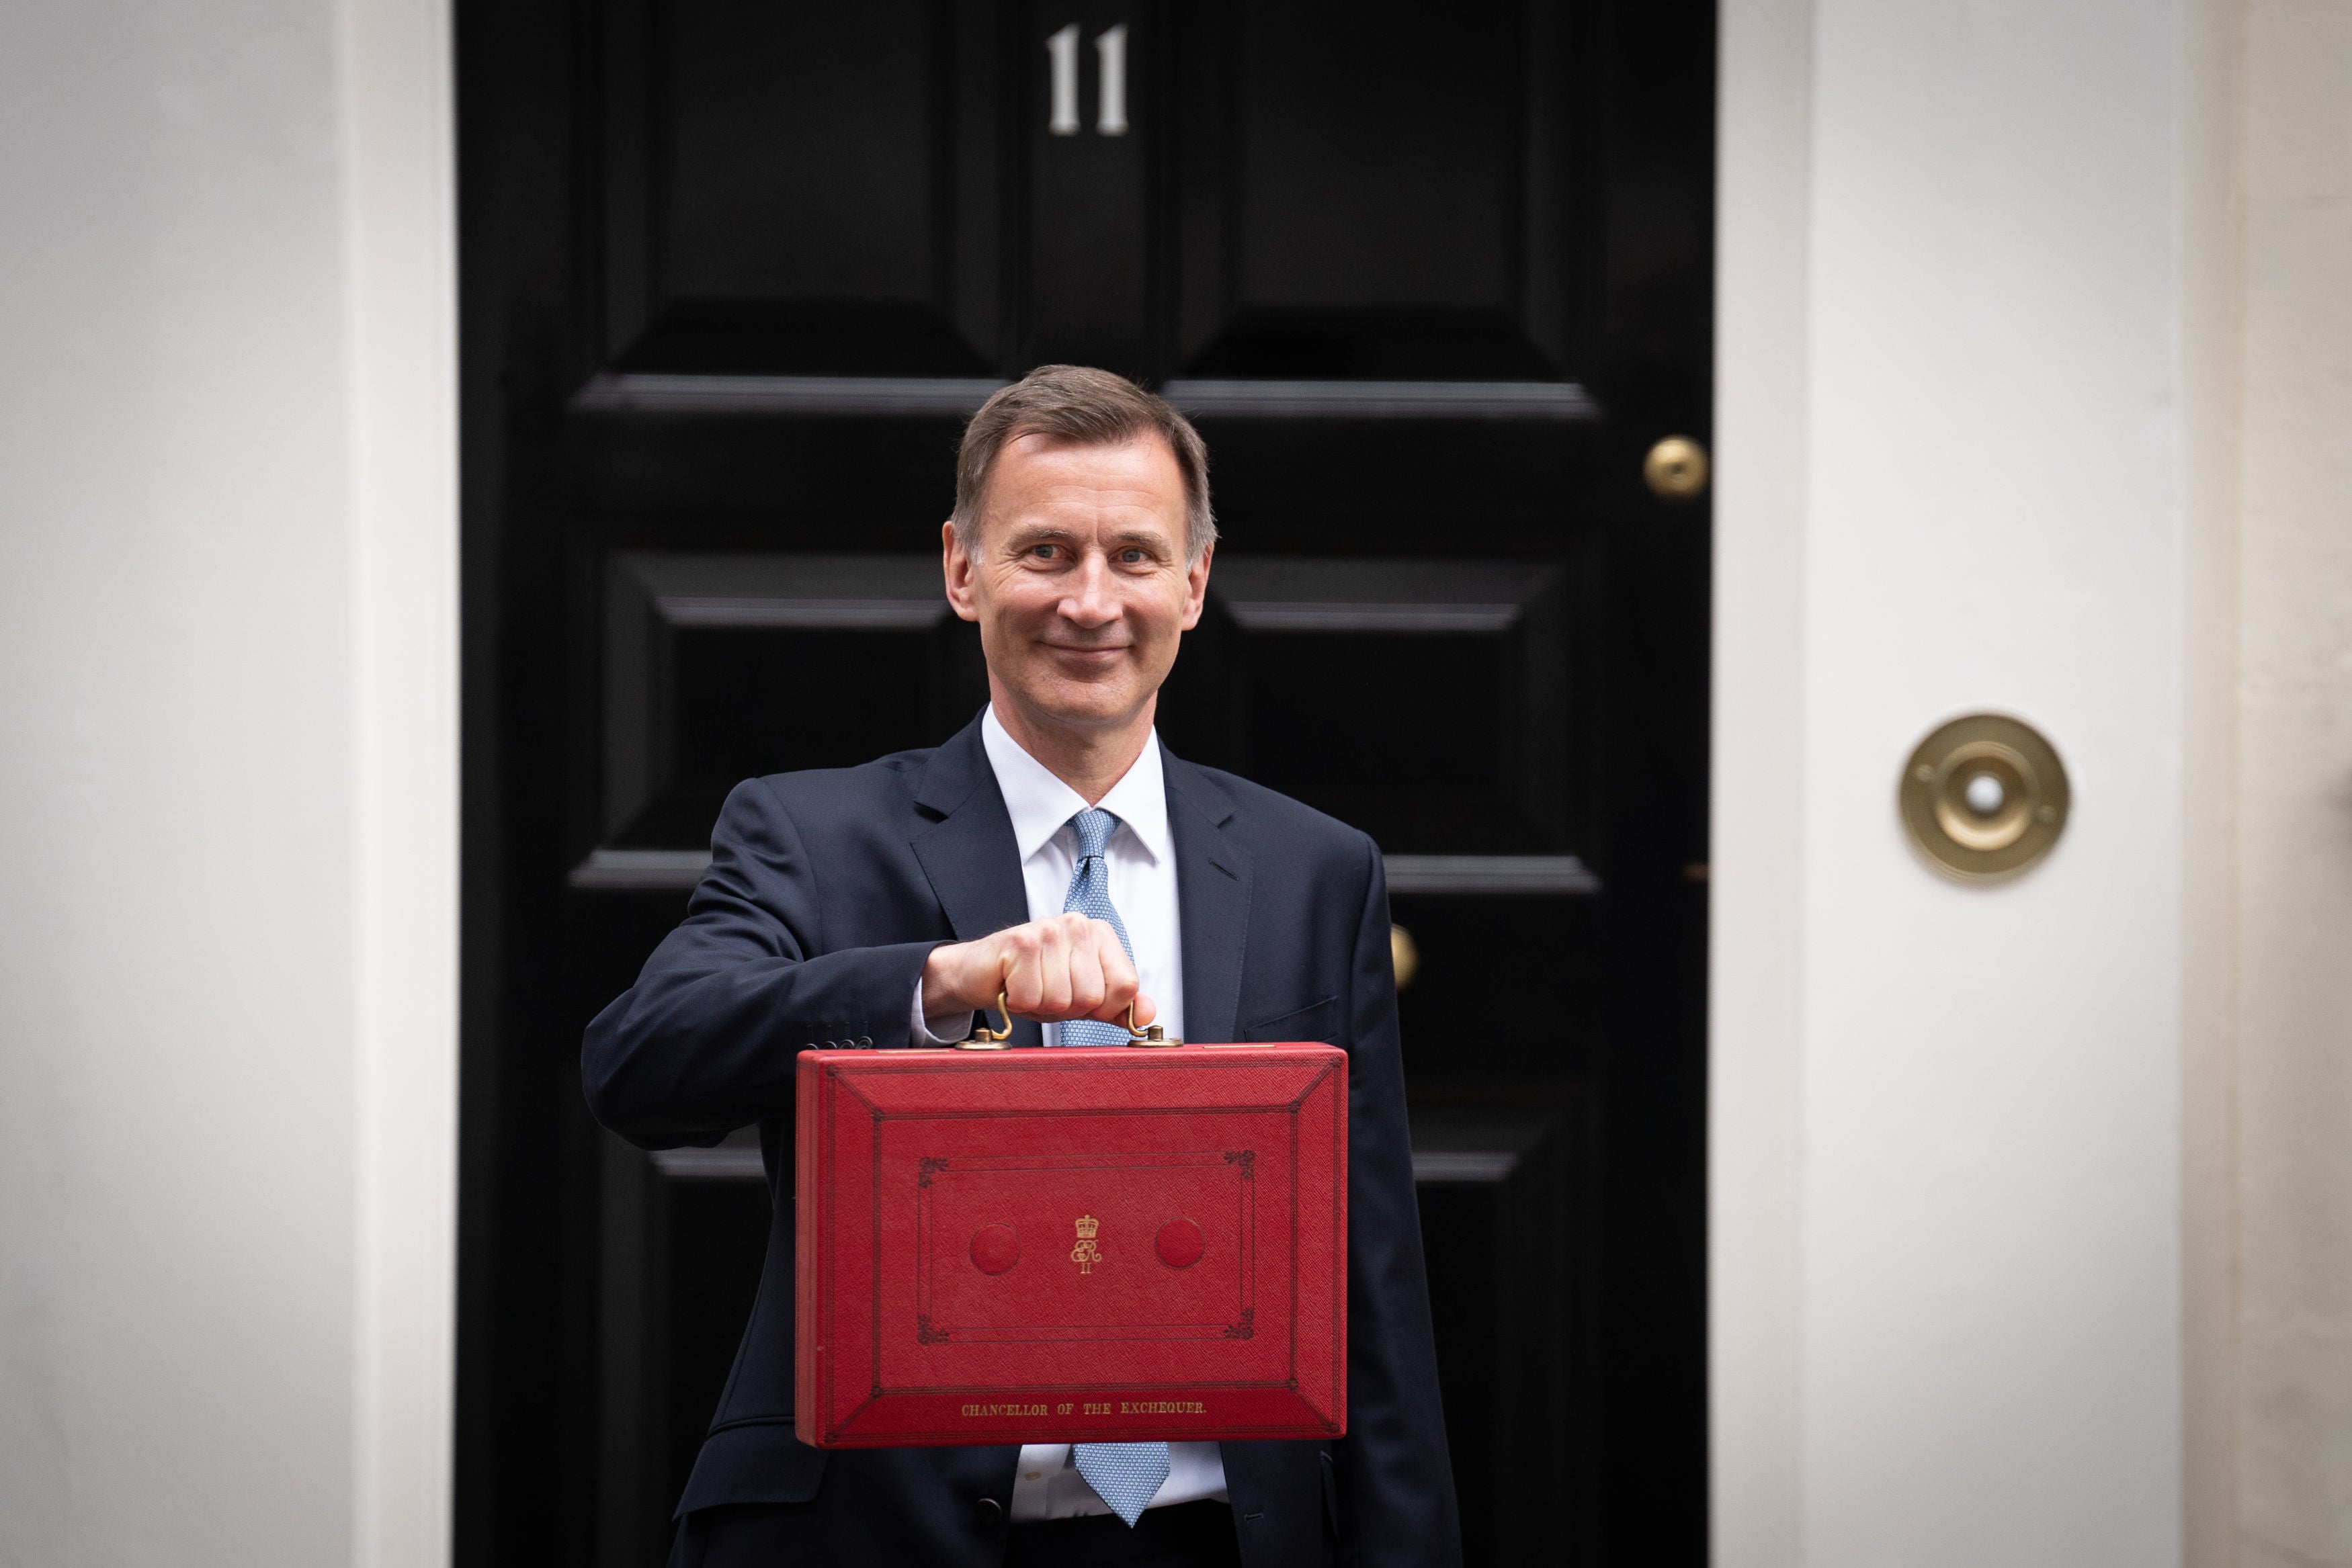 The chancellor is said to be considering a package of tax cuts as part of a pre-election giveaway